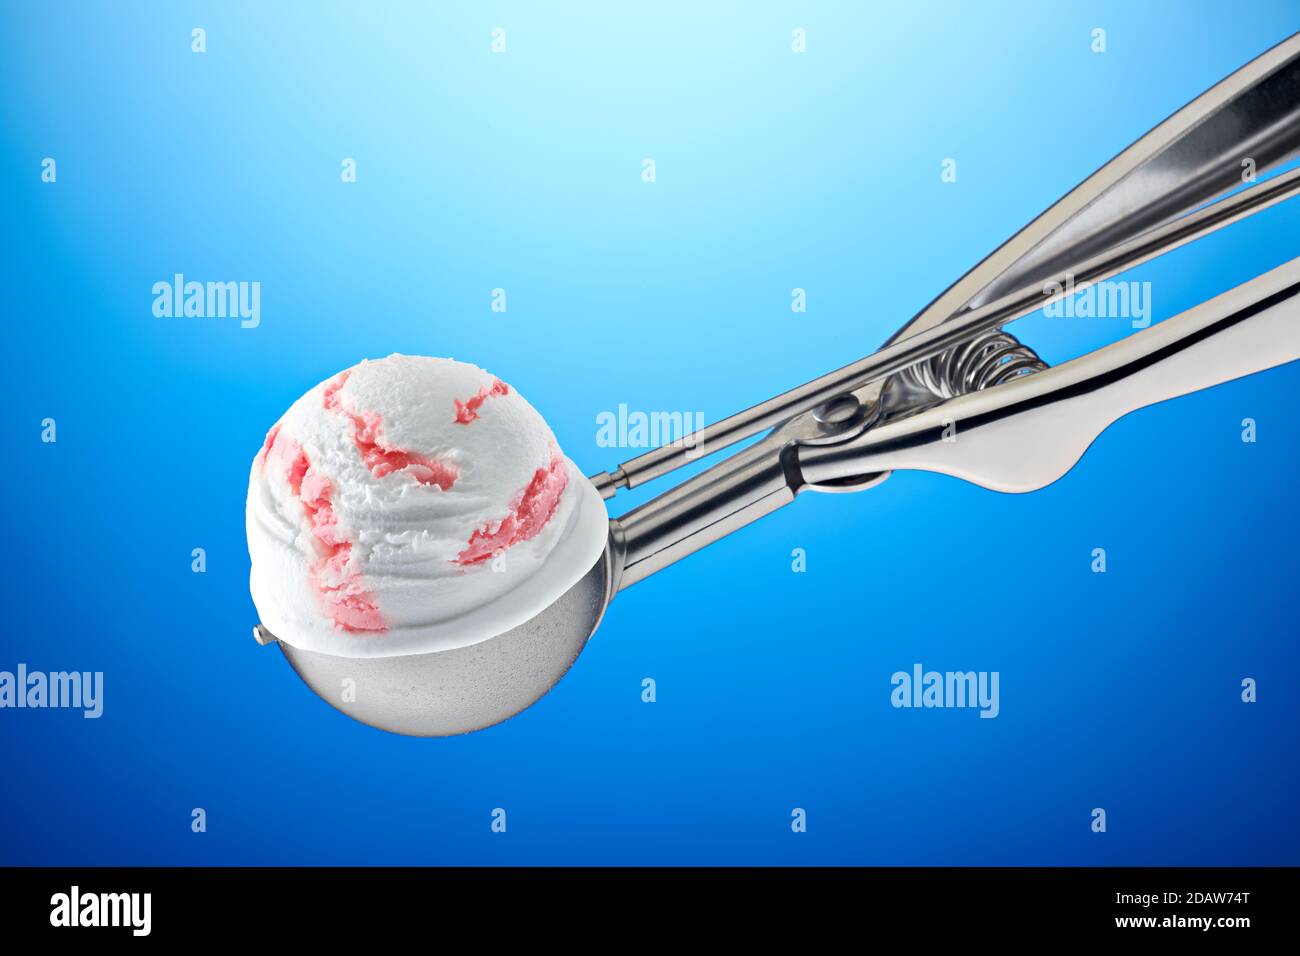 A scoop of variegated strawberry ice cream, on a dispenser, on a blue background. Stock Photo